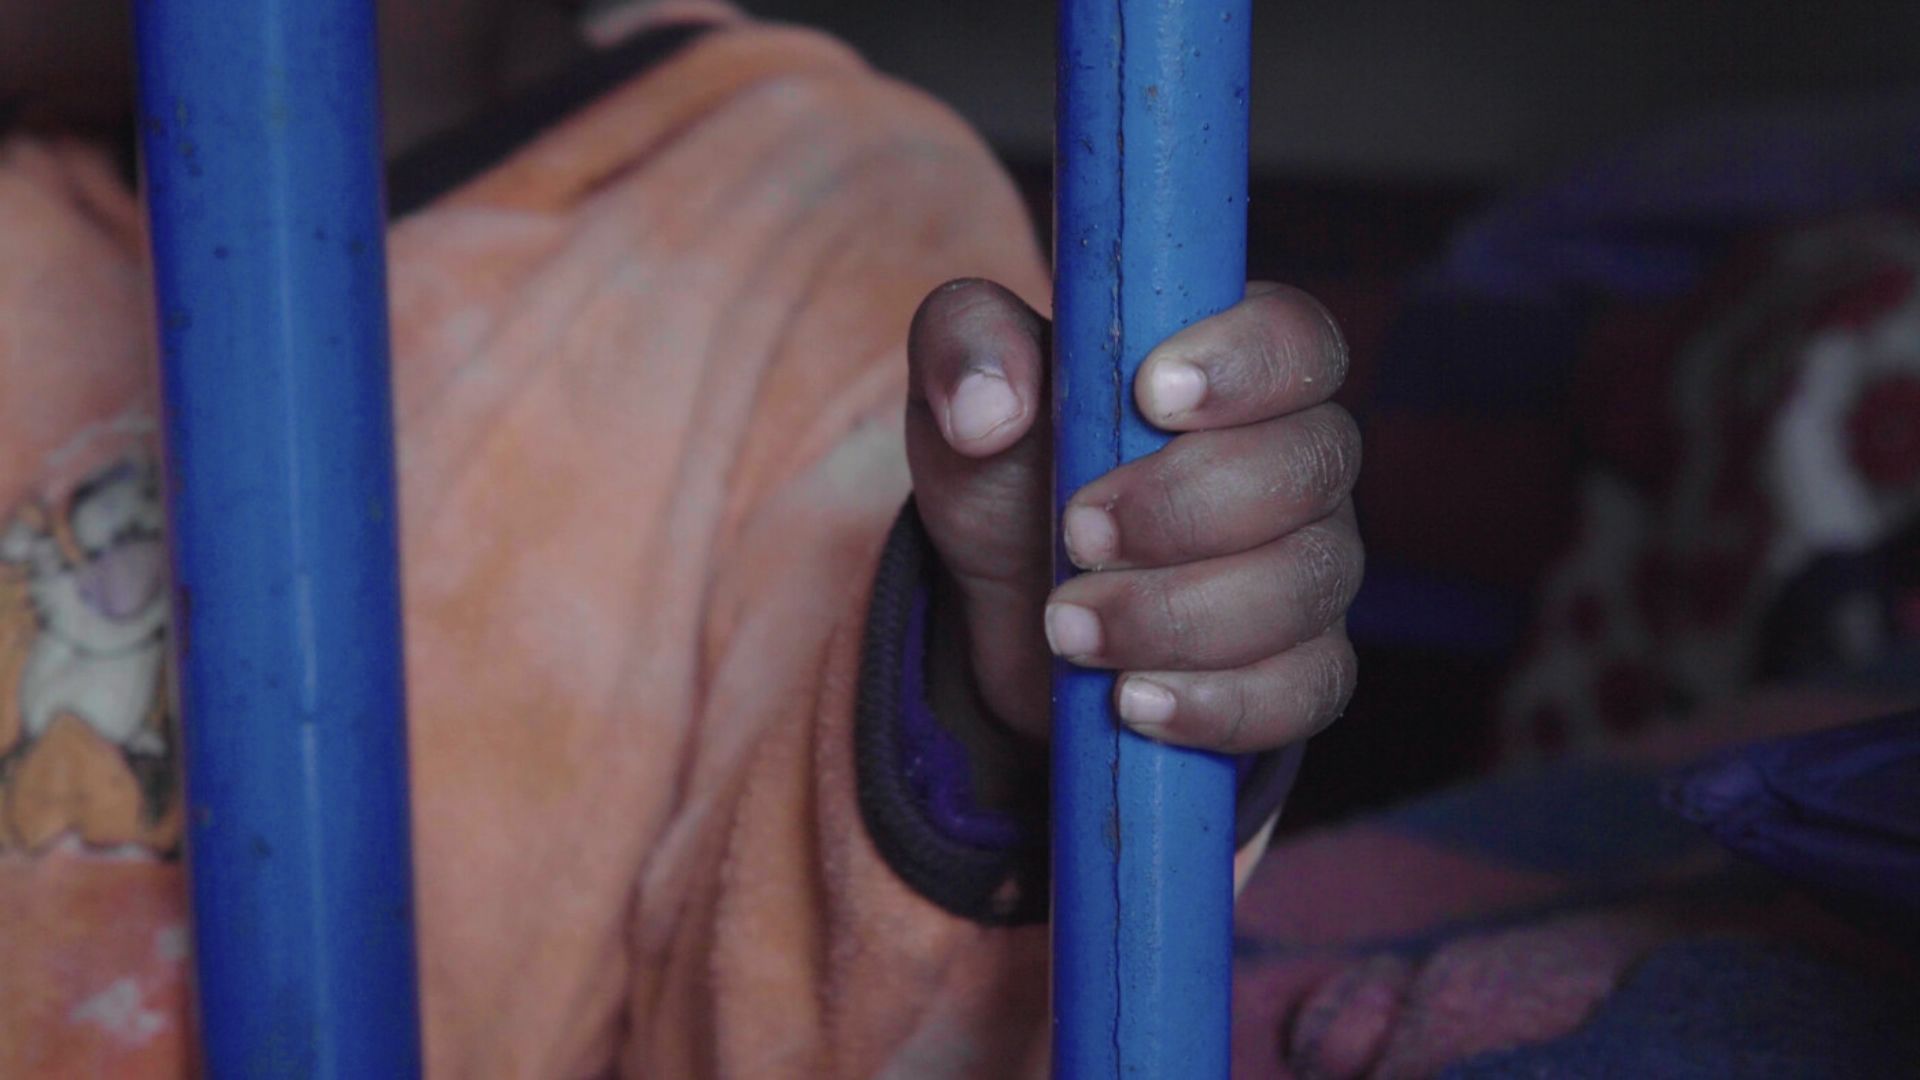 A child's hands on metal bars in an institution in Kenya